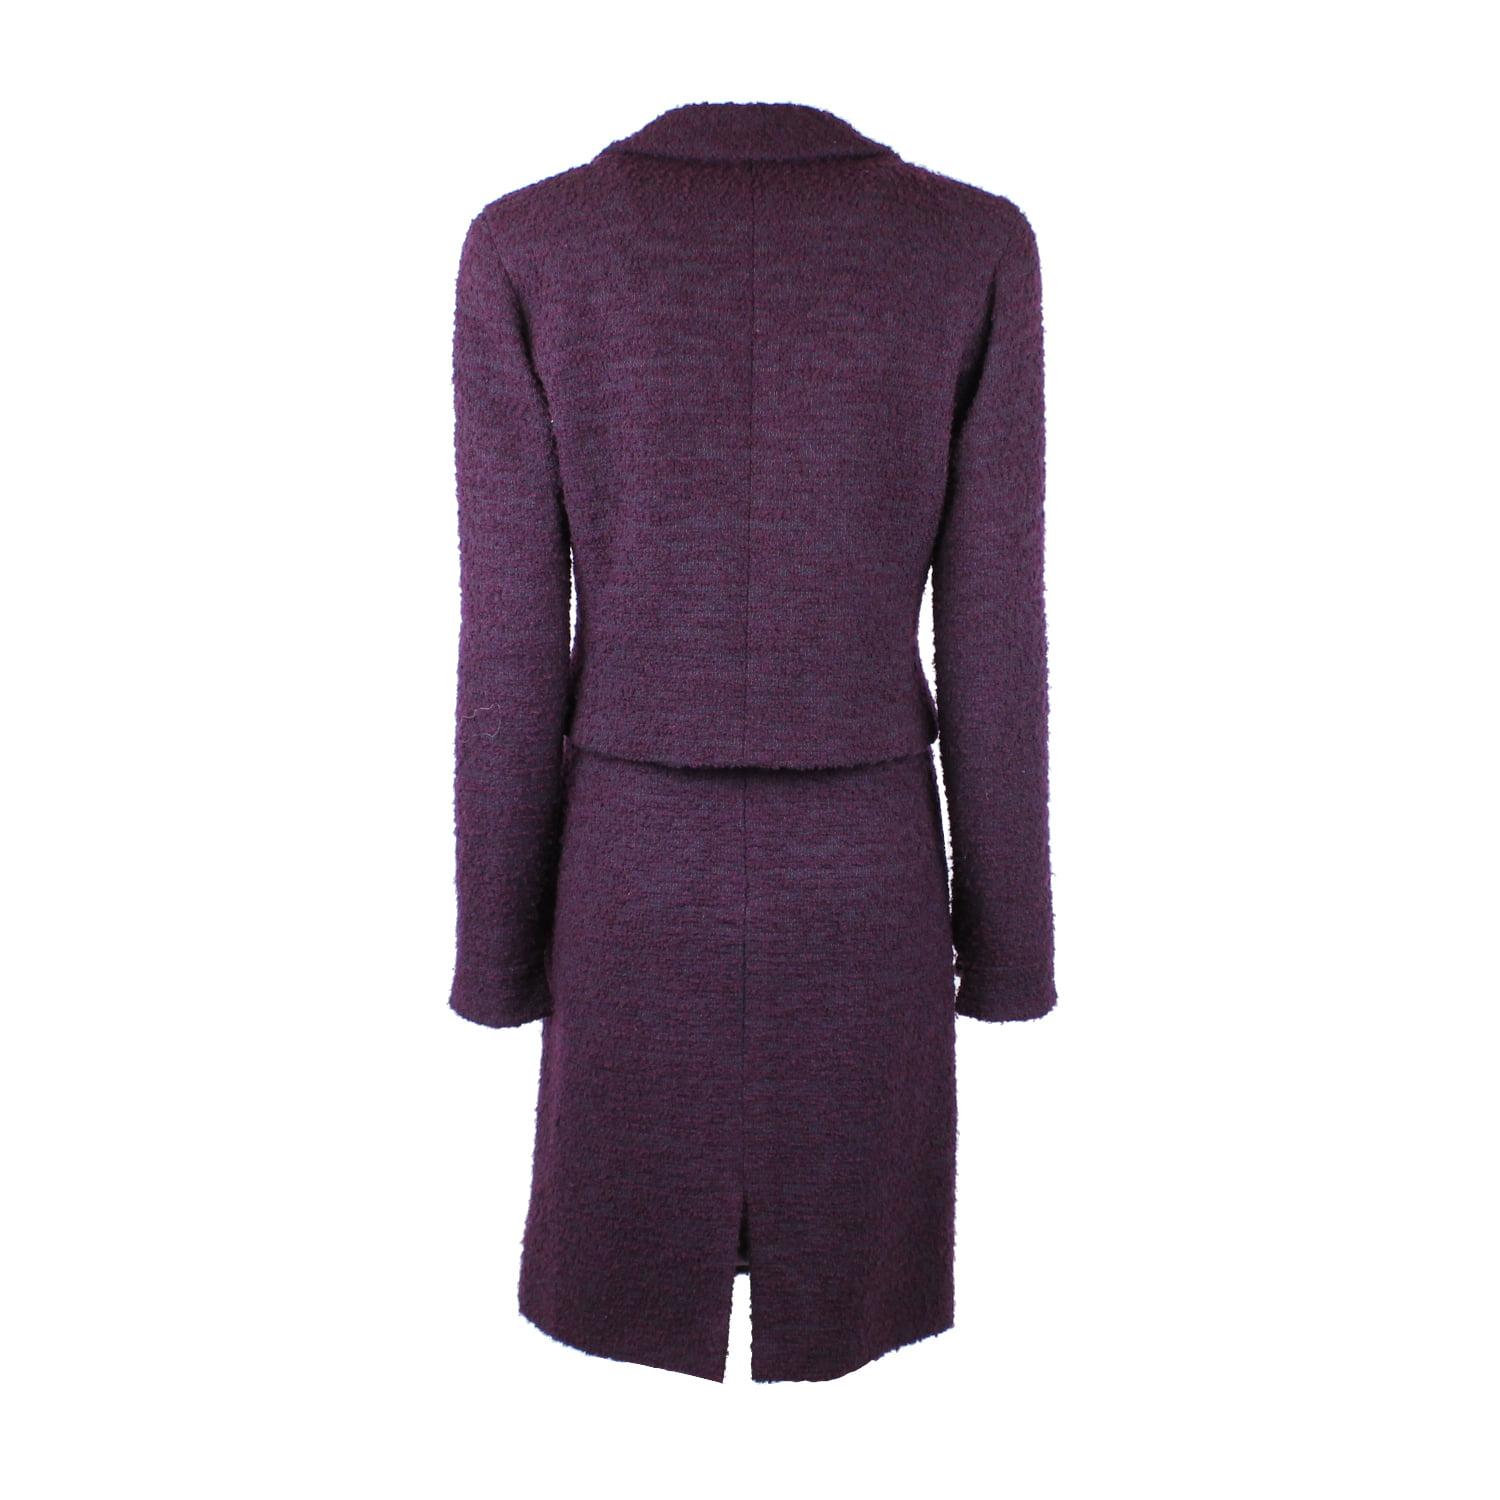 Timeless Chanel boucle wool skirt suit, in a lovely shade of aubergine purple from the pre-fall autumn / winter 2000 collection. The jacket has a classic pointed lapel and an asymmetrical front fastening, complete with three pewter coloured buttons